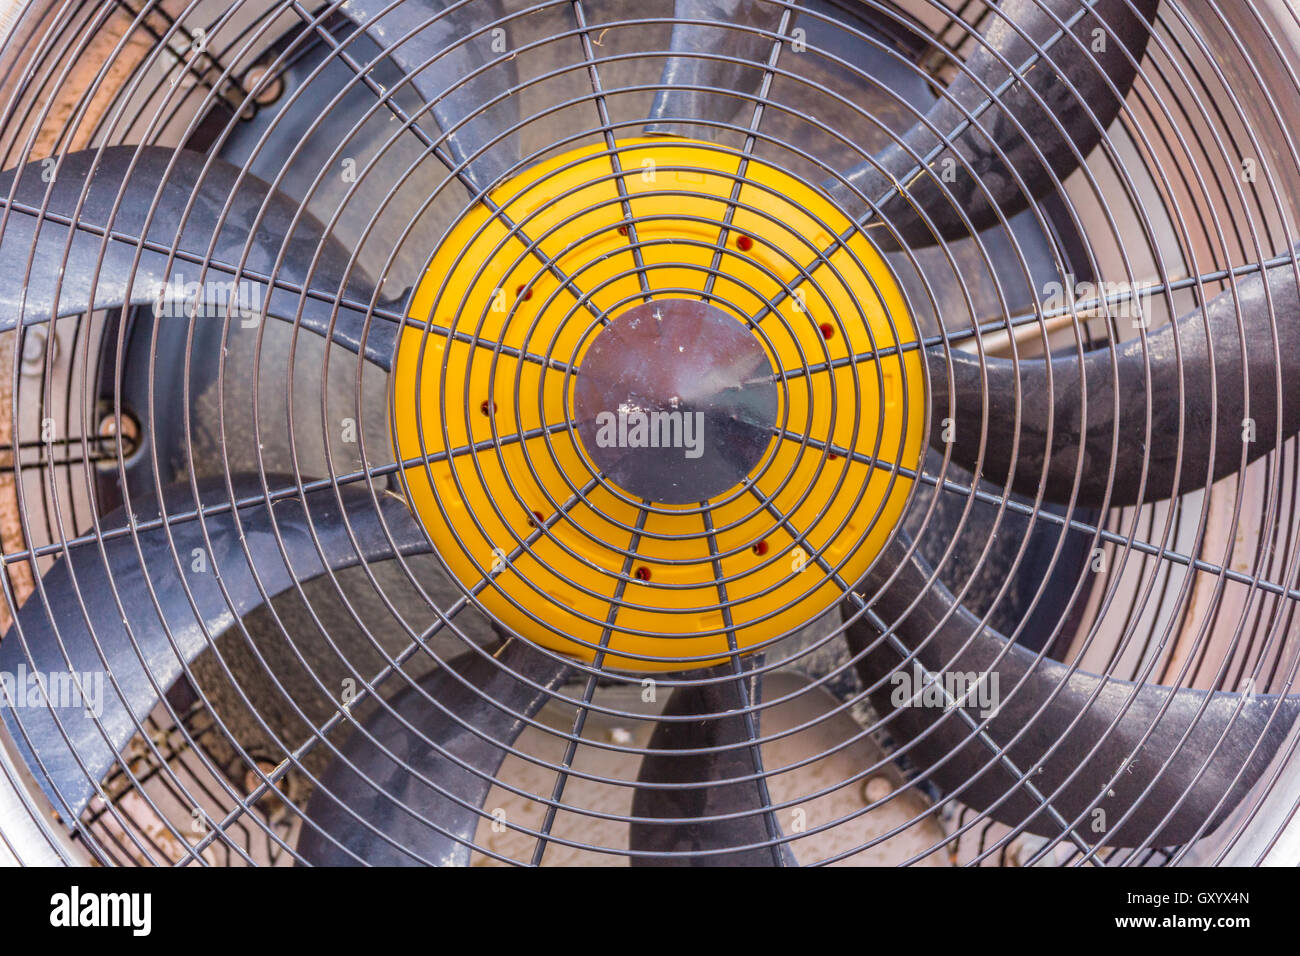 agricultural machine atomizer fan Stock Photo